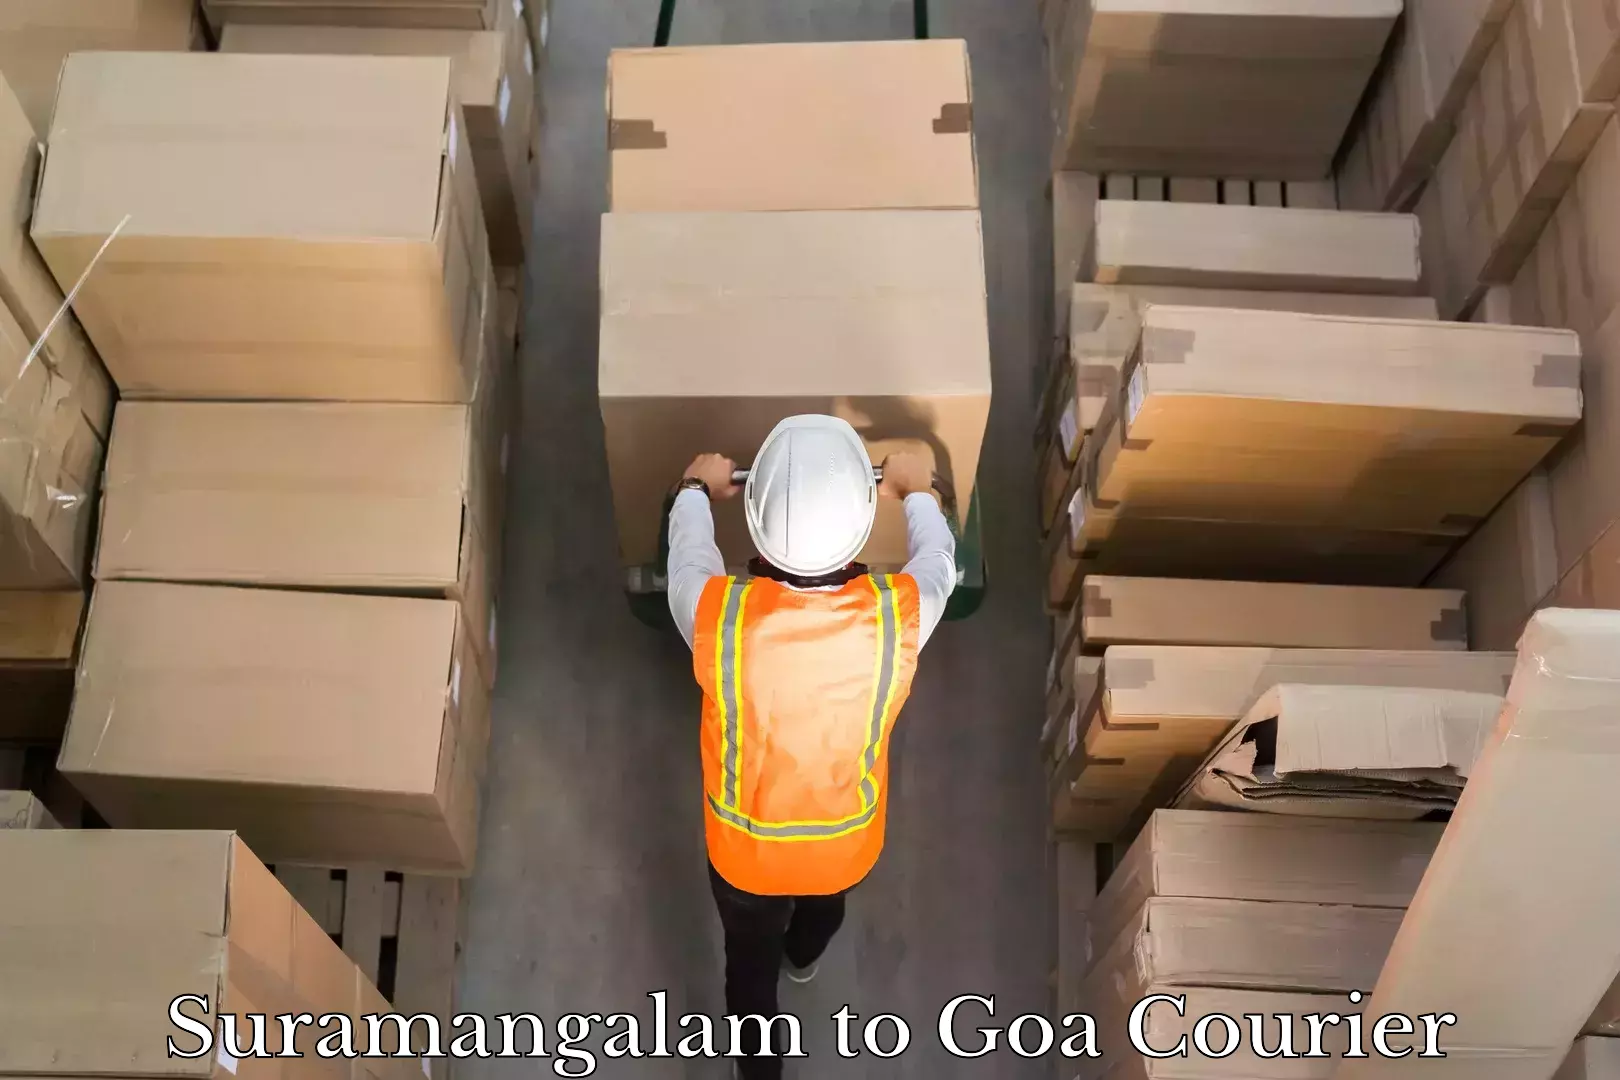 Business delivery service Suramangalam to Goa